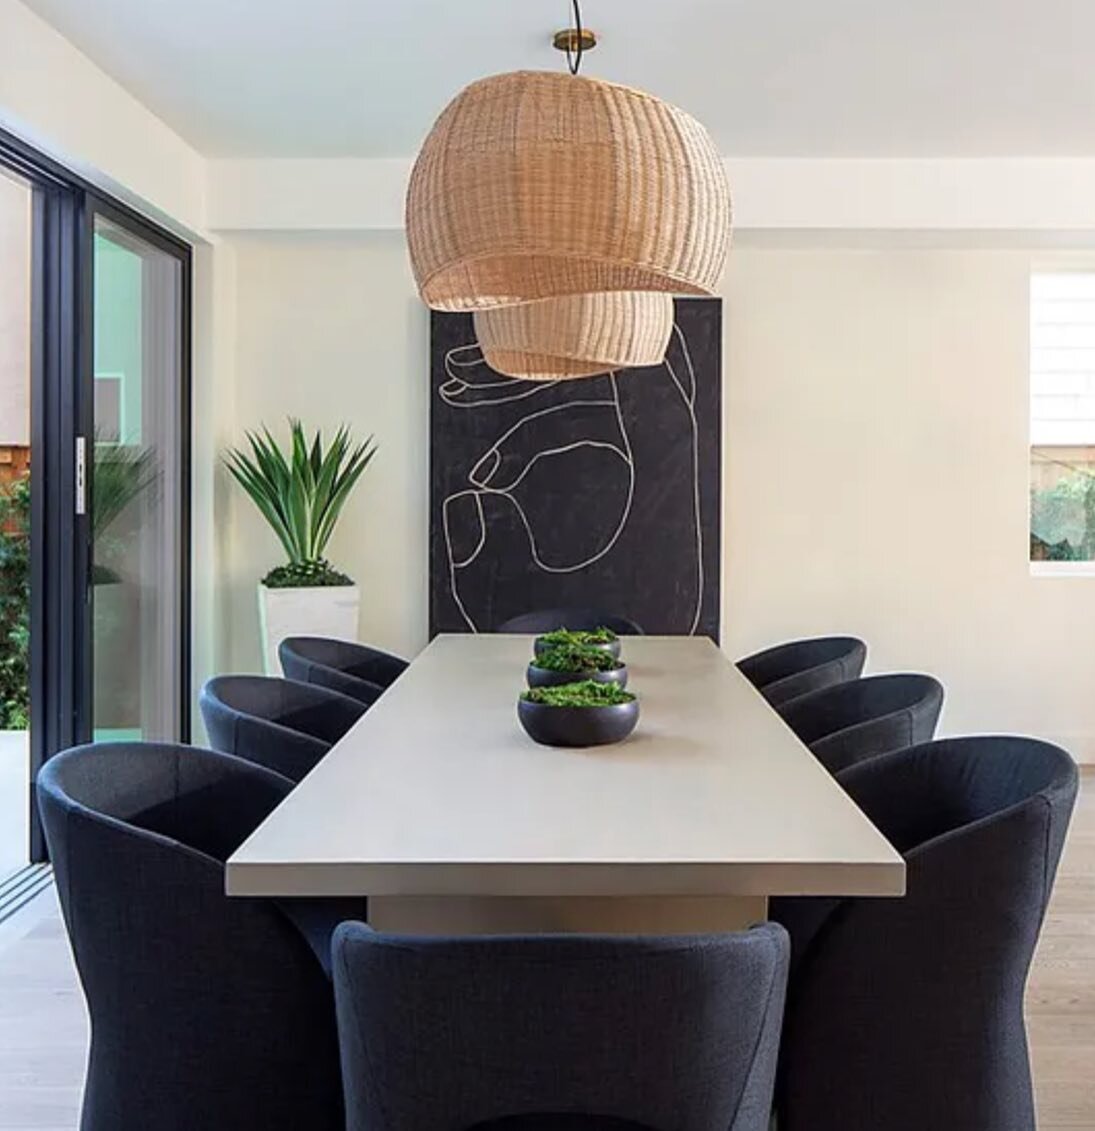 Dinner party ready!

Listing provided by Timothy Tamara
.
.
.
#stagingsells
#staging
#homestaging
#interiordesign
#housedesign
#homedesign
#houseinspo
#luxuryrealestate
#houseoftheday
#homeinteriors
#luxurystaging
#socalmanisions
#modernhome
#luxuryh